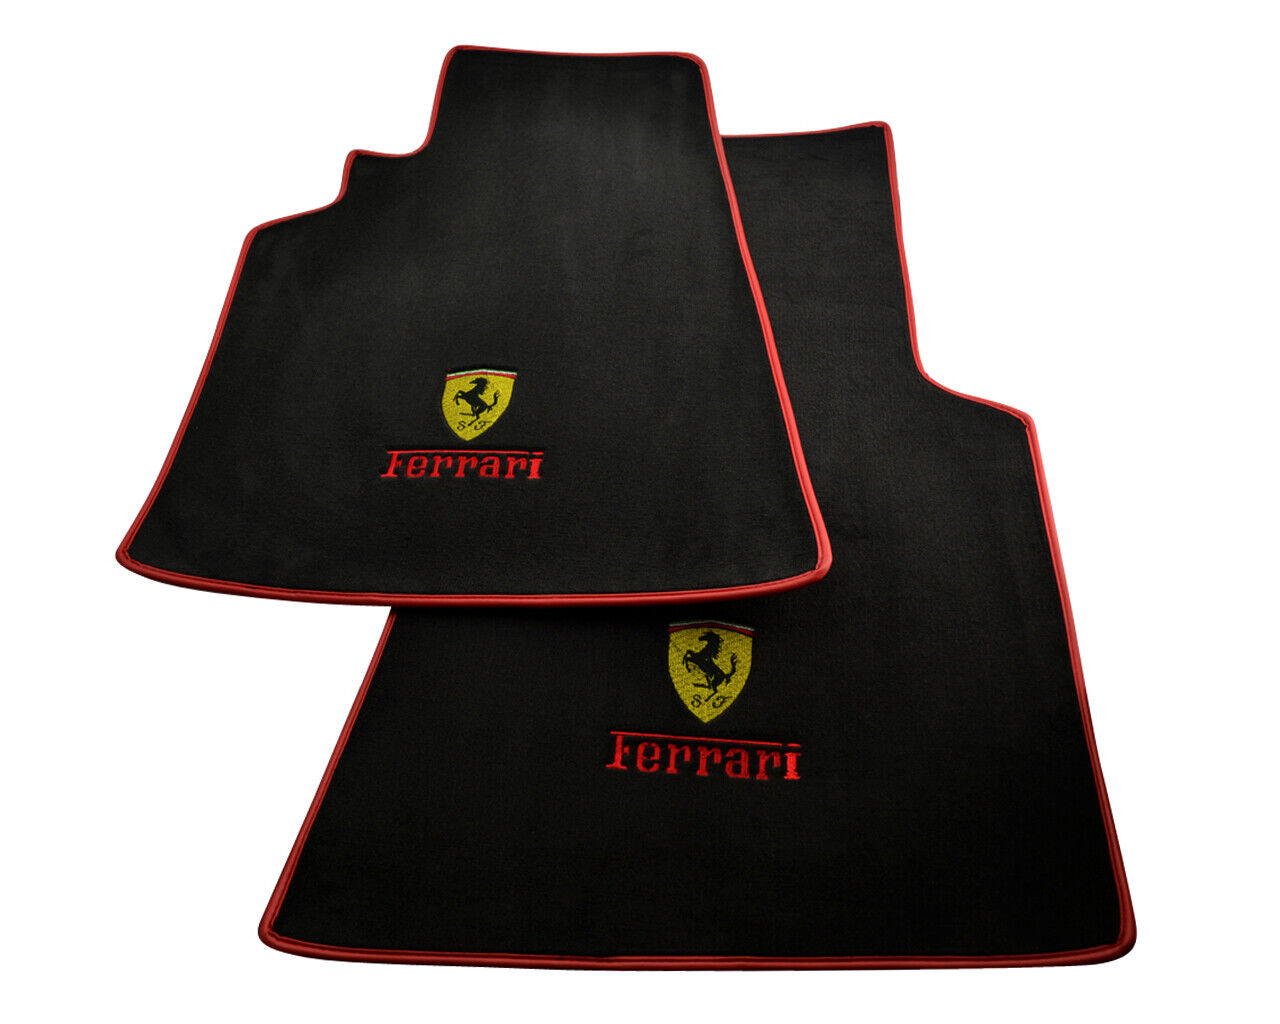 Floor Mats For Ferrari 550 Maranello 96-02 Tailored Carpets Red Leather Rounds 